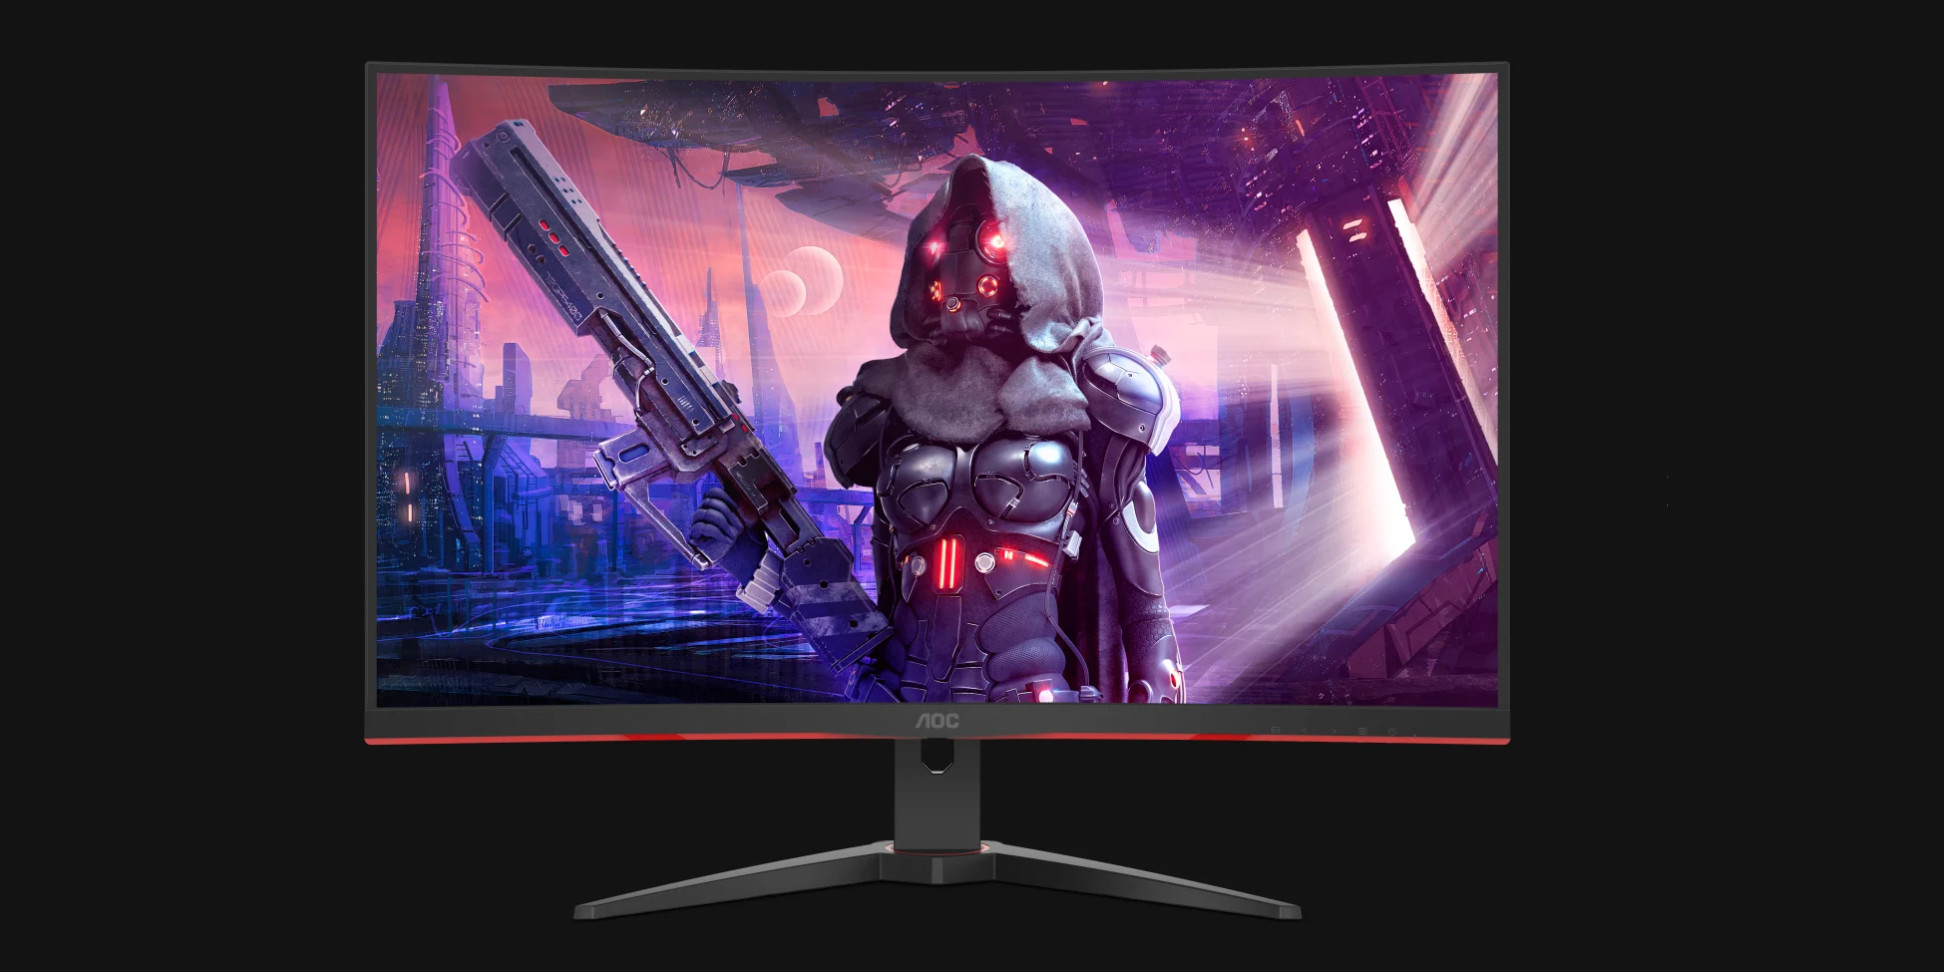 AOC Unleashes New Curved Gaming Monitor with 165Hz Refresh Rate in